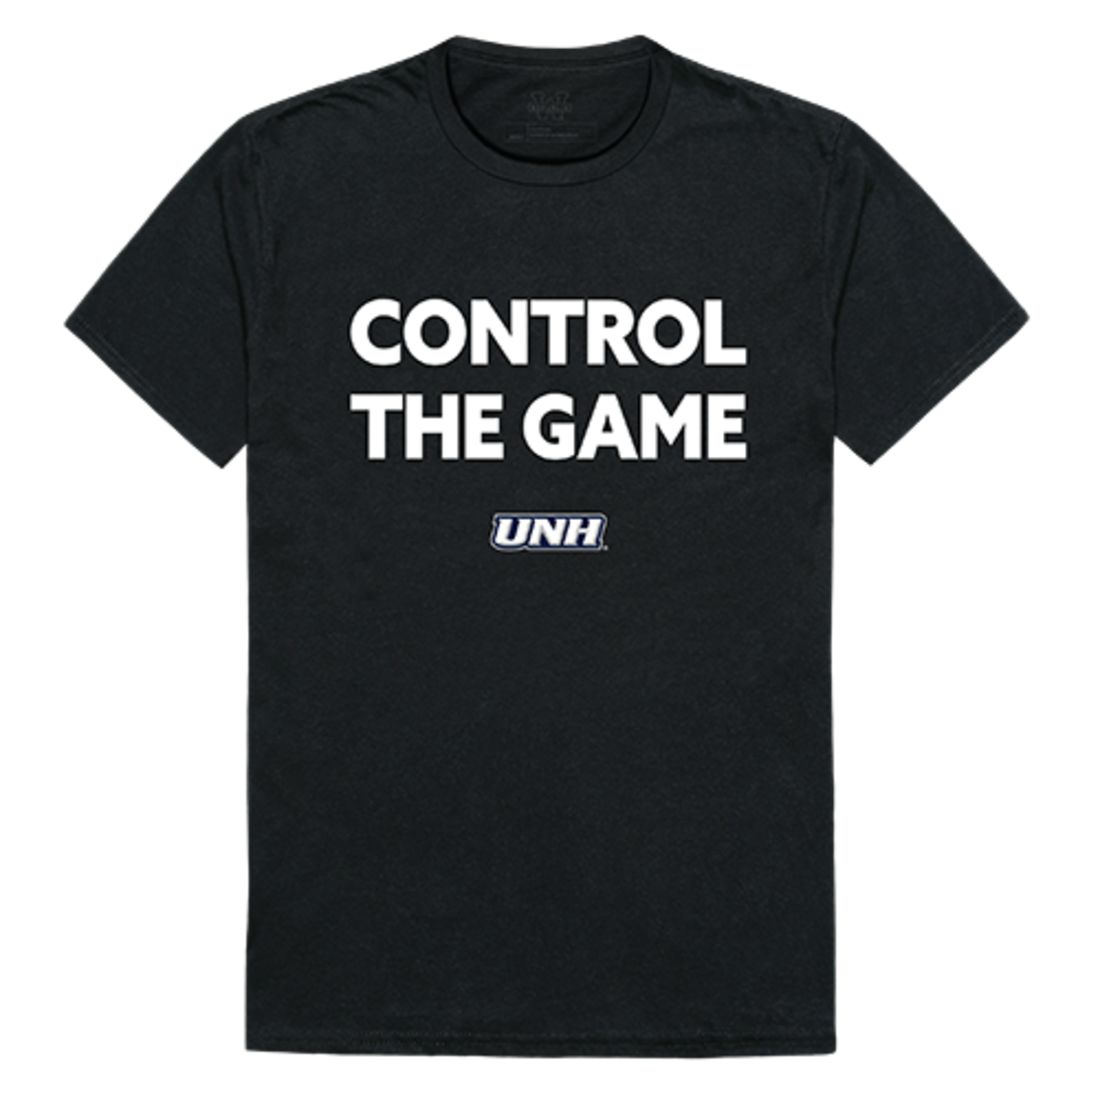 UNH University of New Hampshire Wildcats Control the Game T-Shirt Black-Campus-Wardrobe